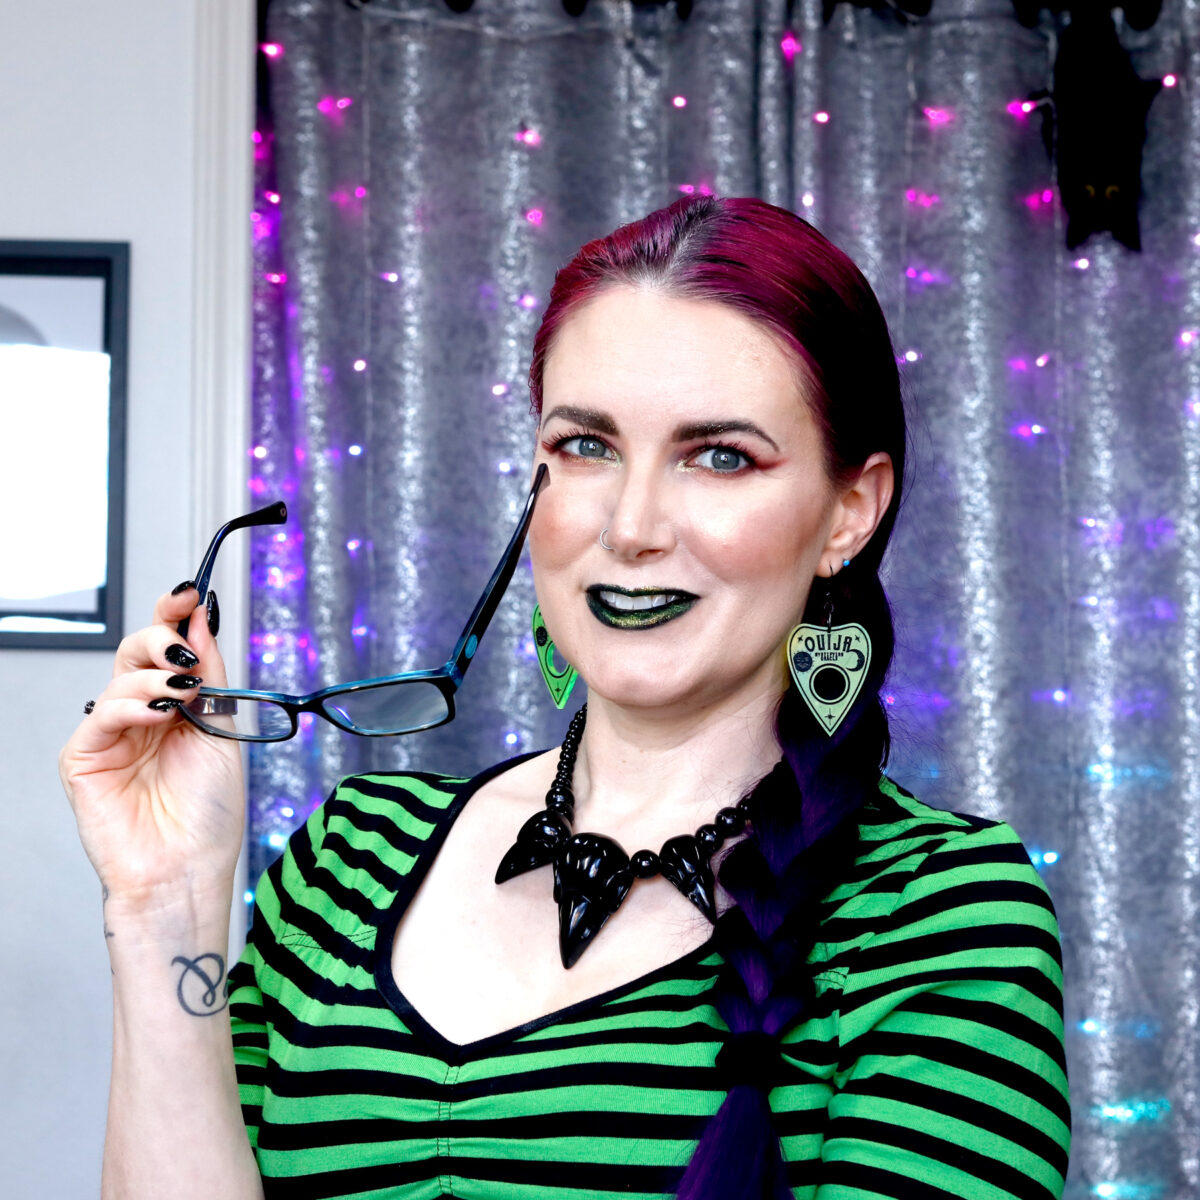 Cordelia is wearing Hell Bunny green and black striped shirt, black crow skull necklace, and green ouija planchett earrings